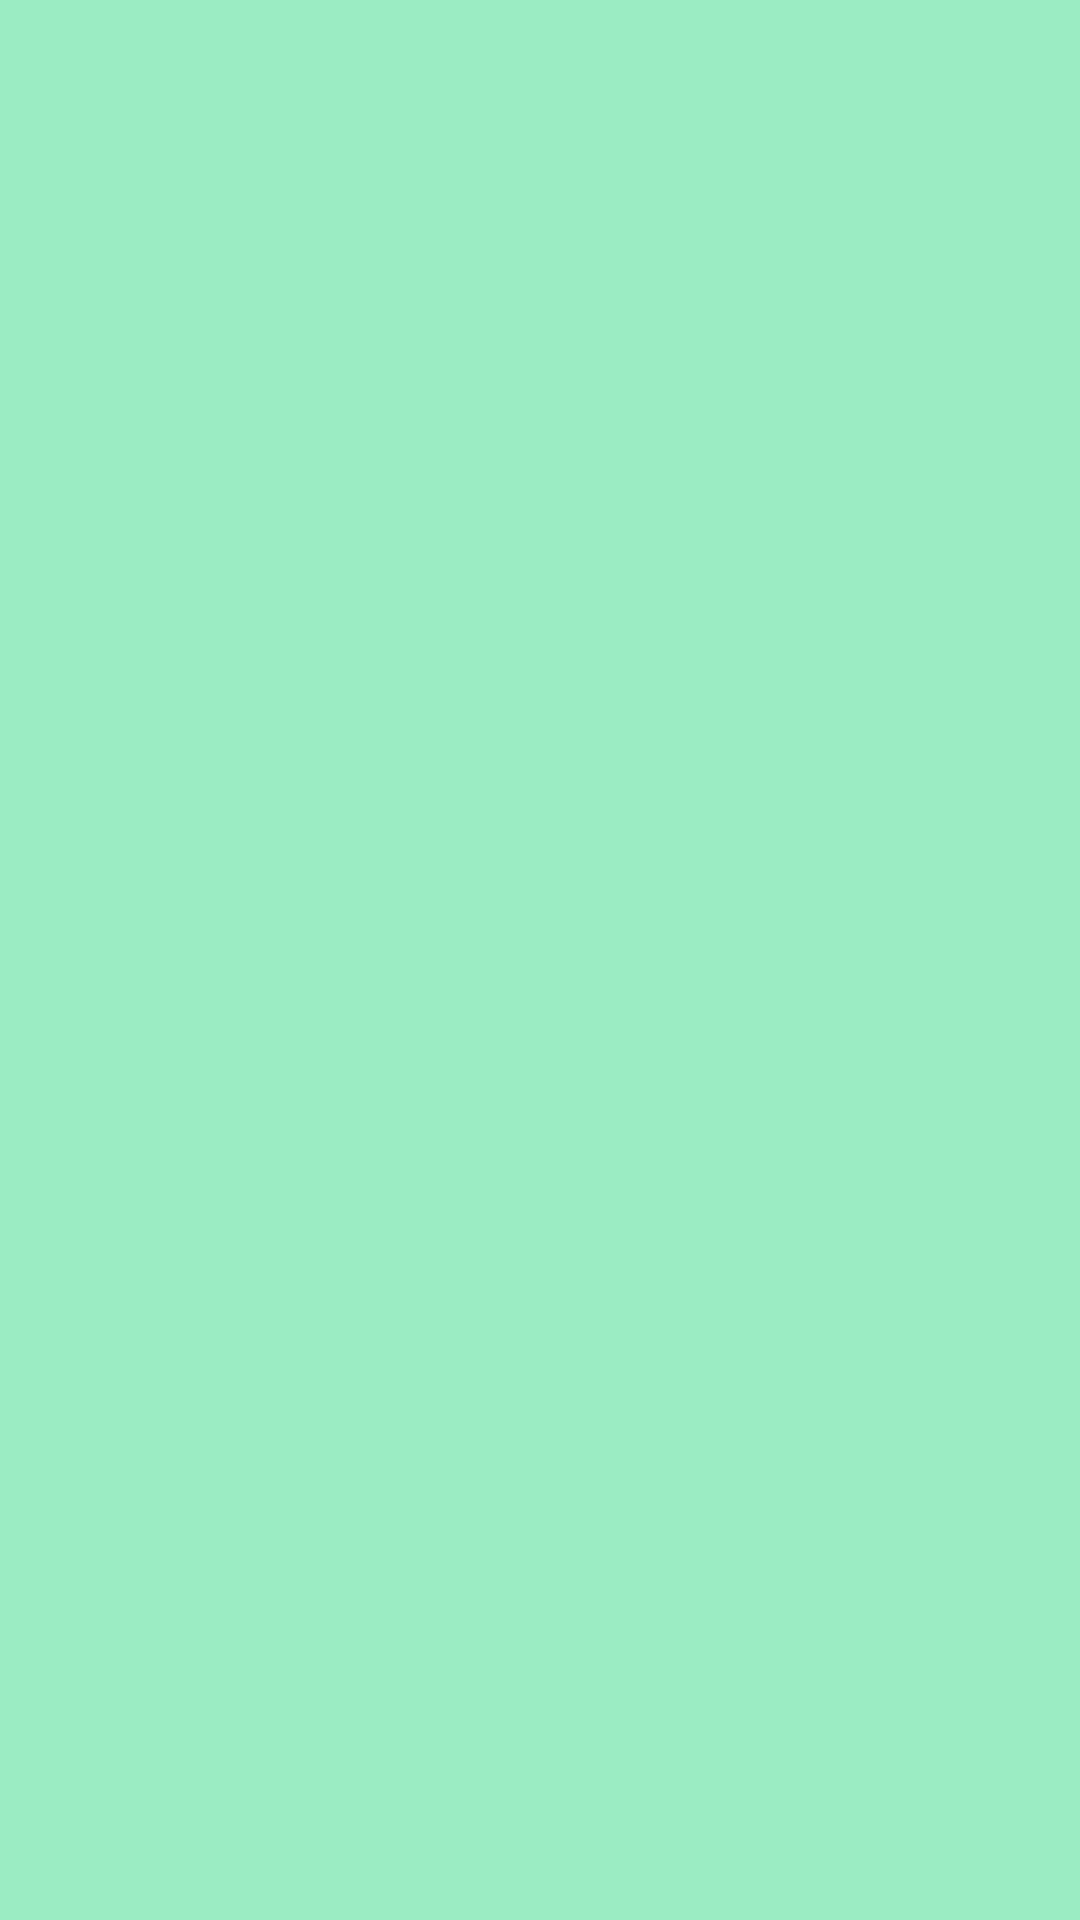 Mint Green iPhone Wallpaper with resolution 1080X1920 pixel. You can make this wallpaper for your iPhone 5, 6, 7, 8, X backgrounds, Mobile Screensaver, or iPad Lock Screen